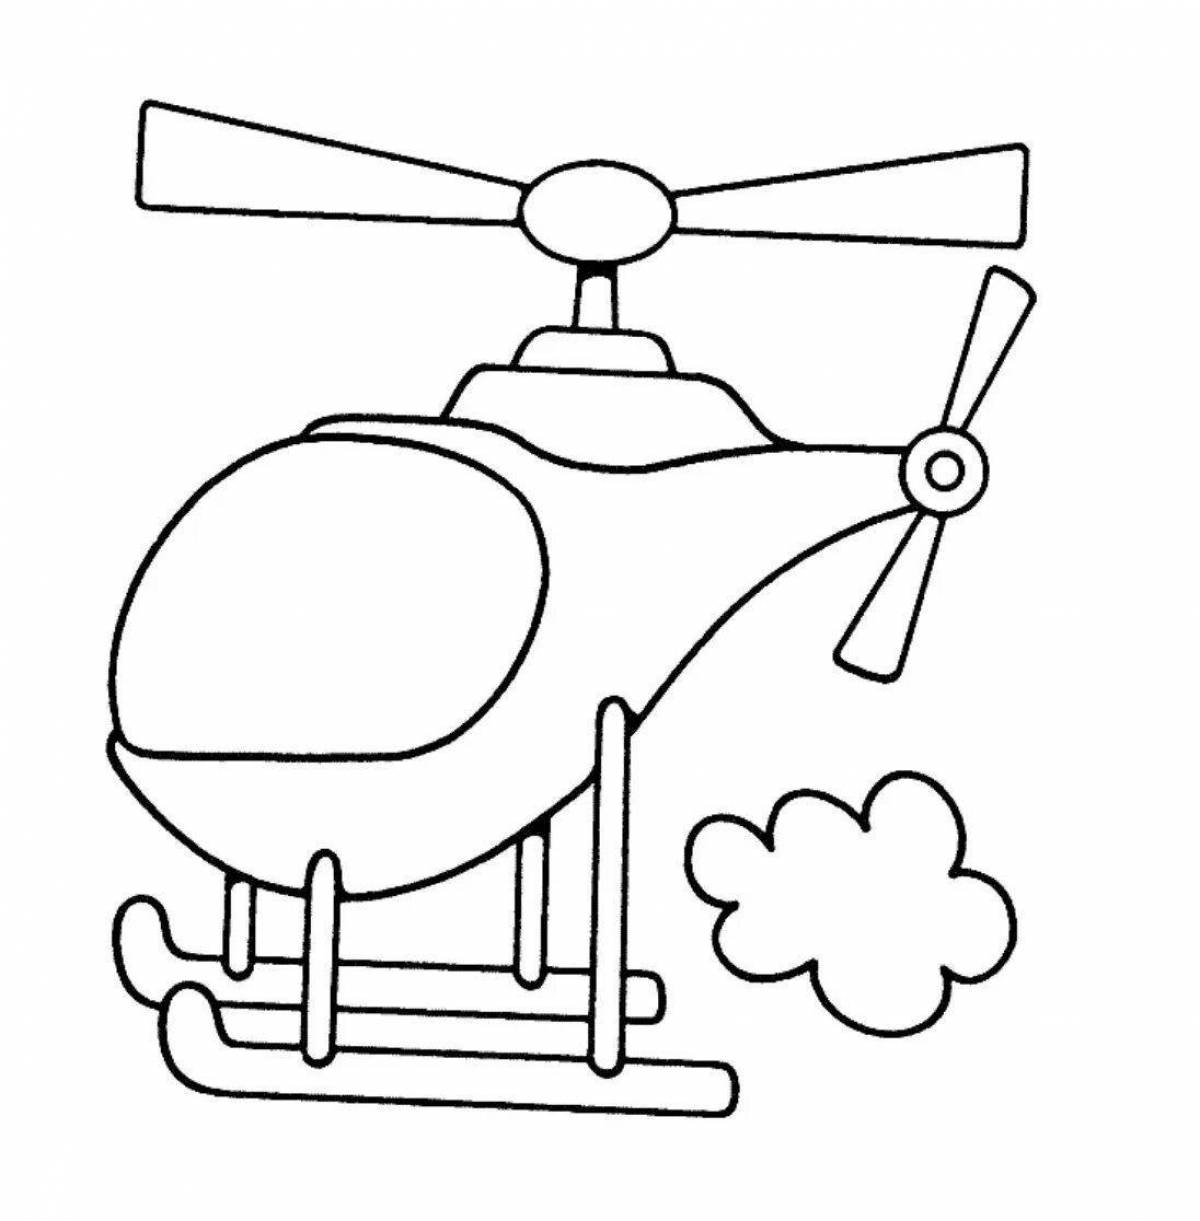 Coloring page funny transport